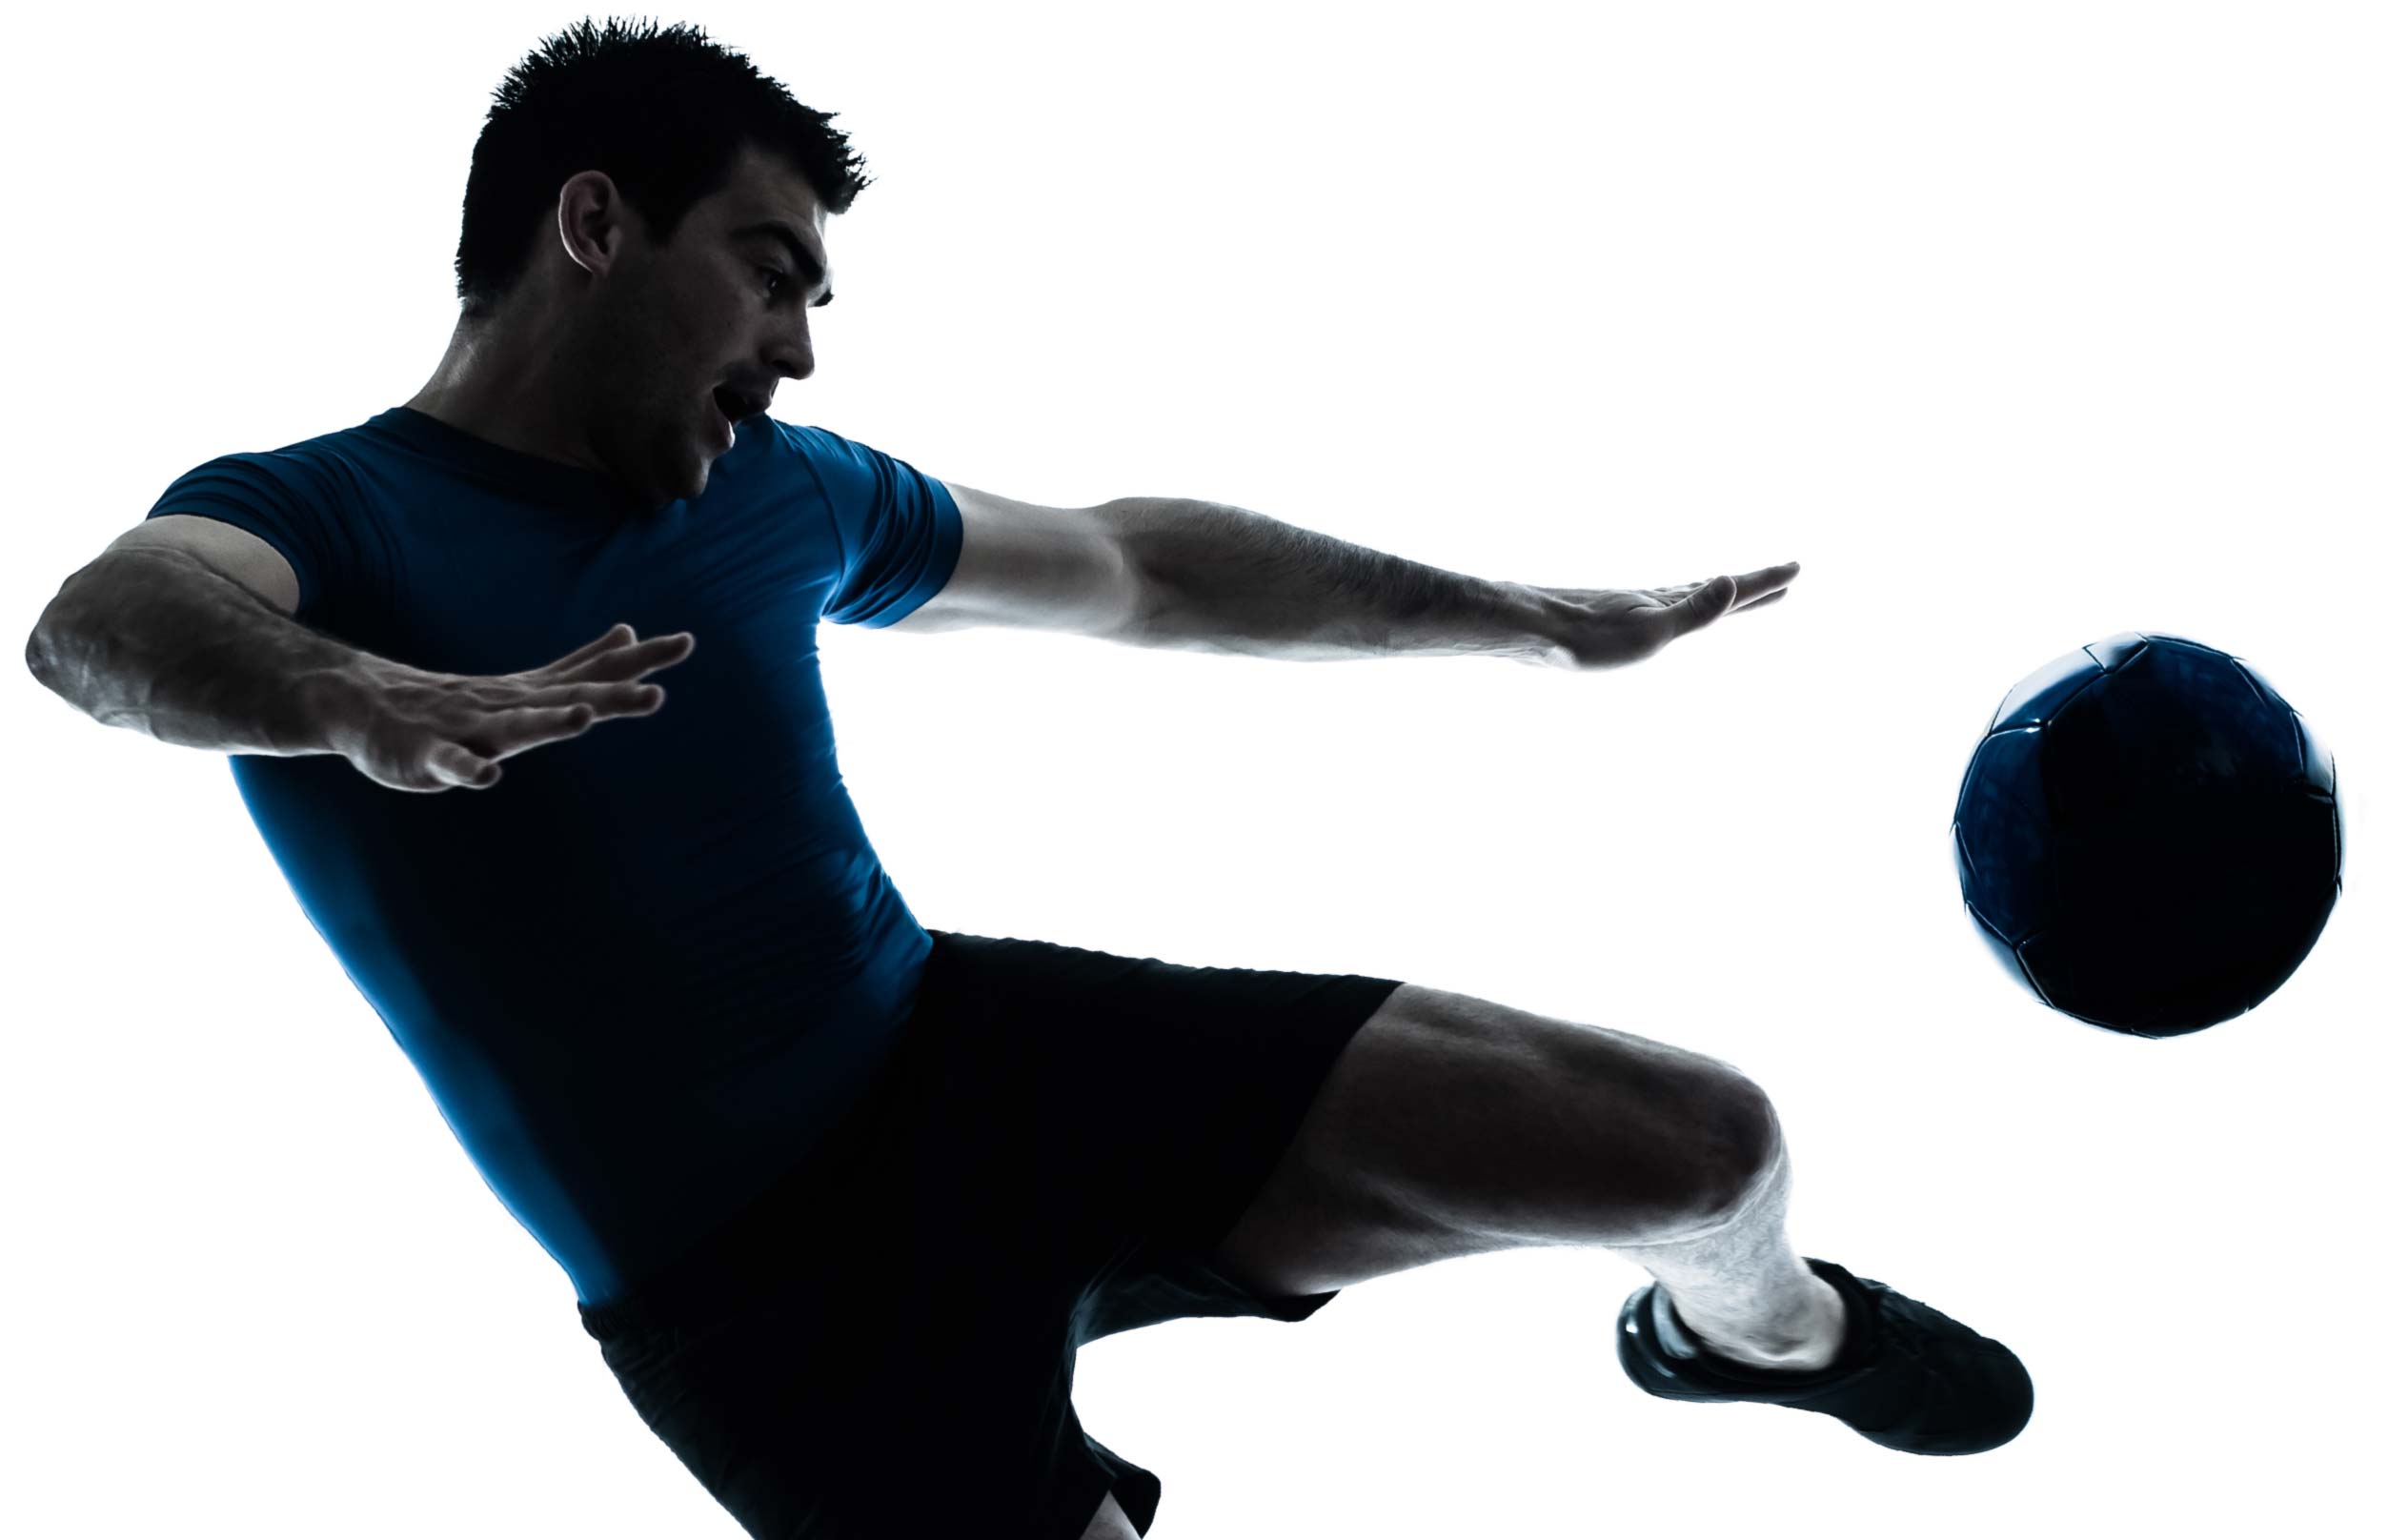 physiotherapy solutions - image of healthy man kicking ball